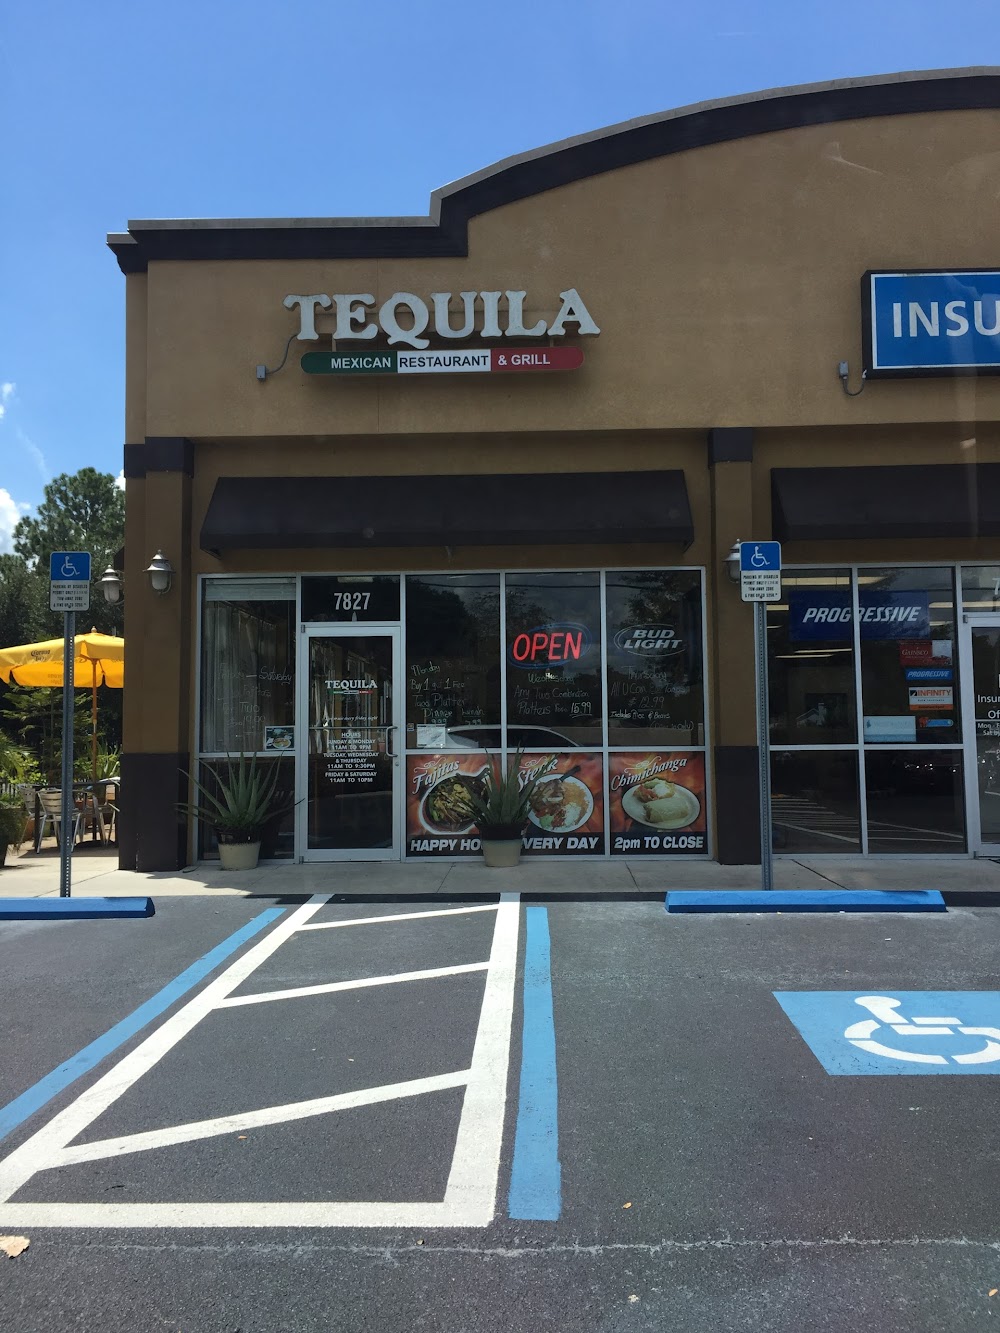 Tequila Mexican Restaurant & Grill